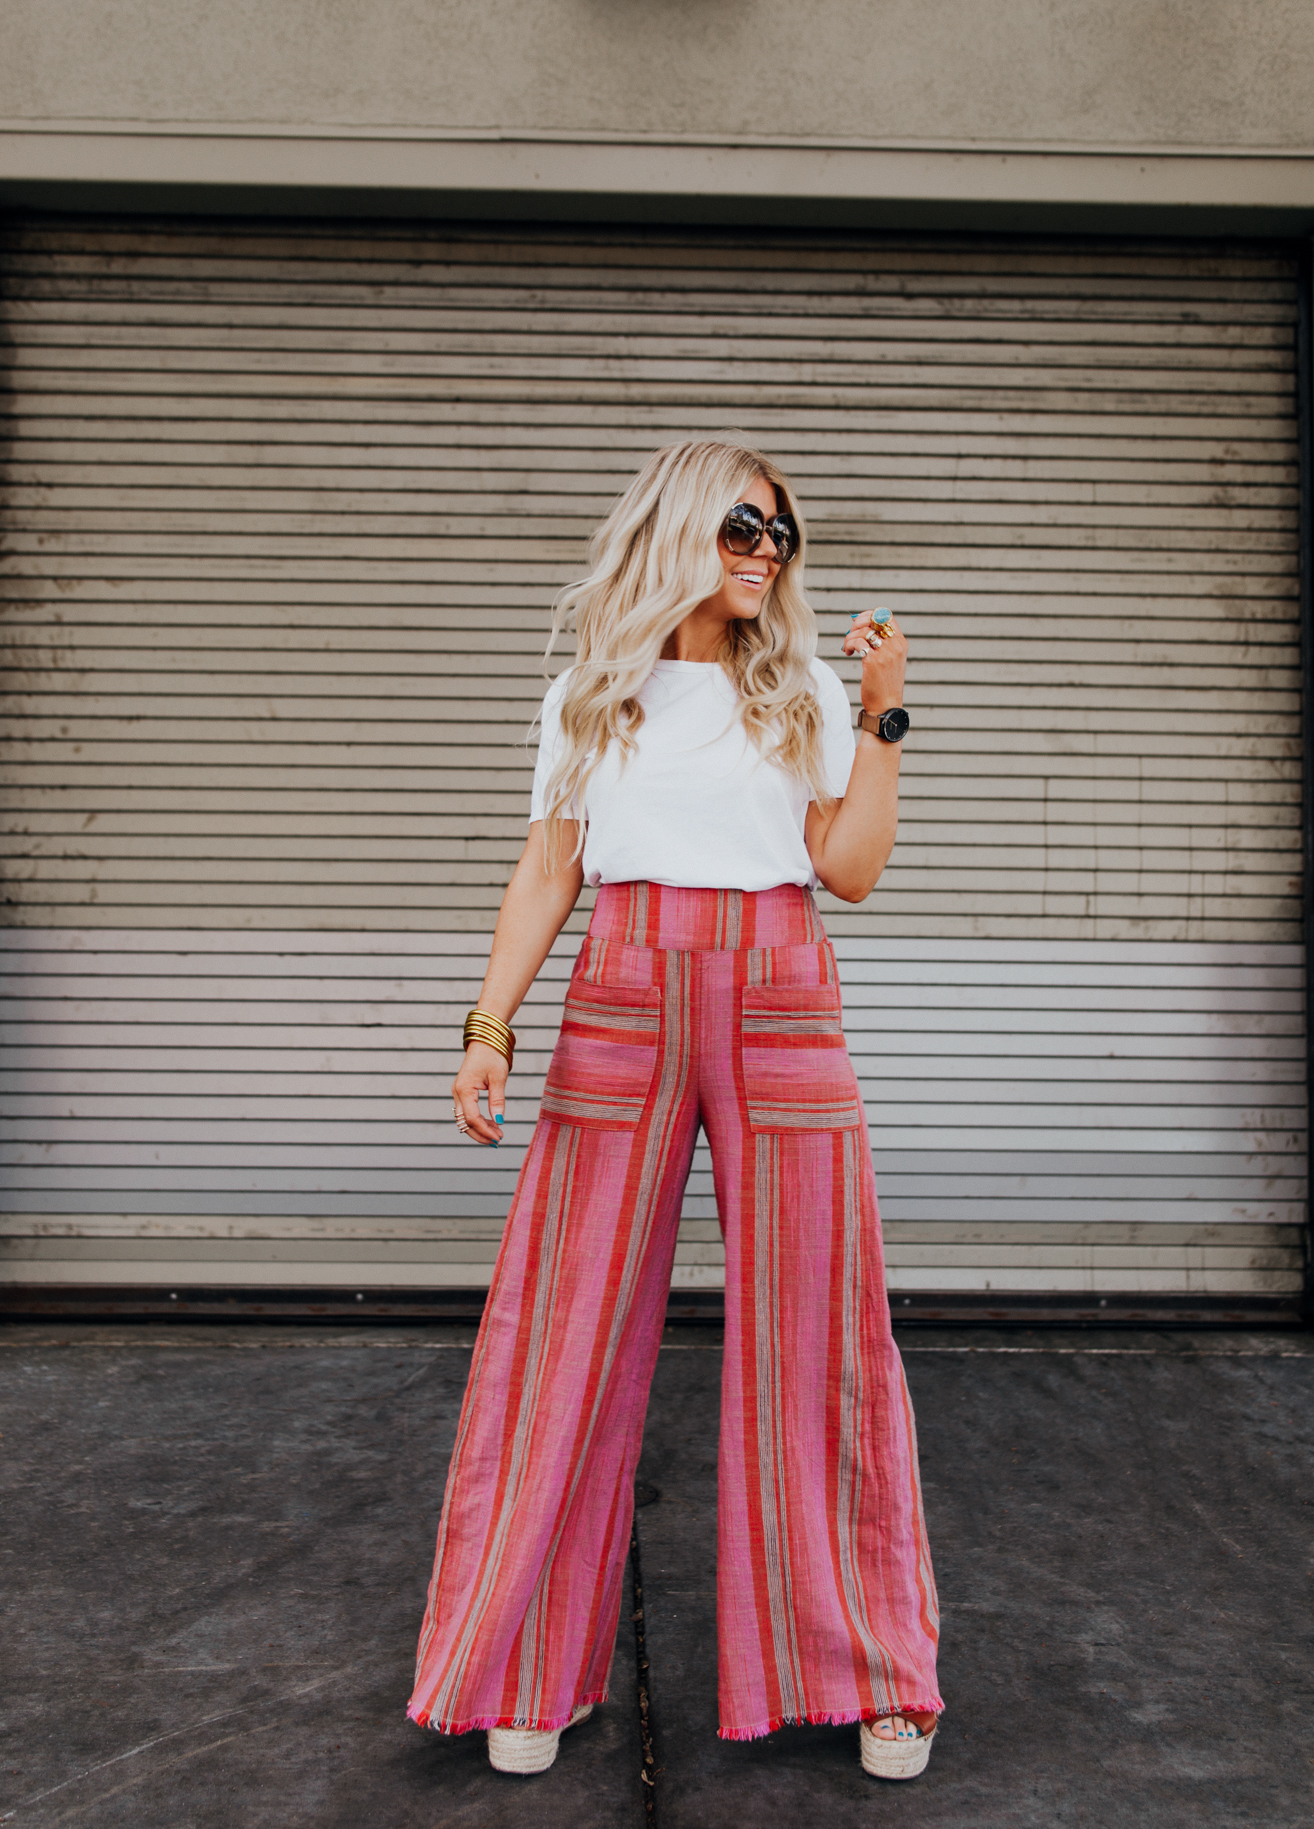 Ways to Try the Patterned-Pants Trend